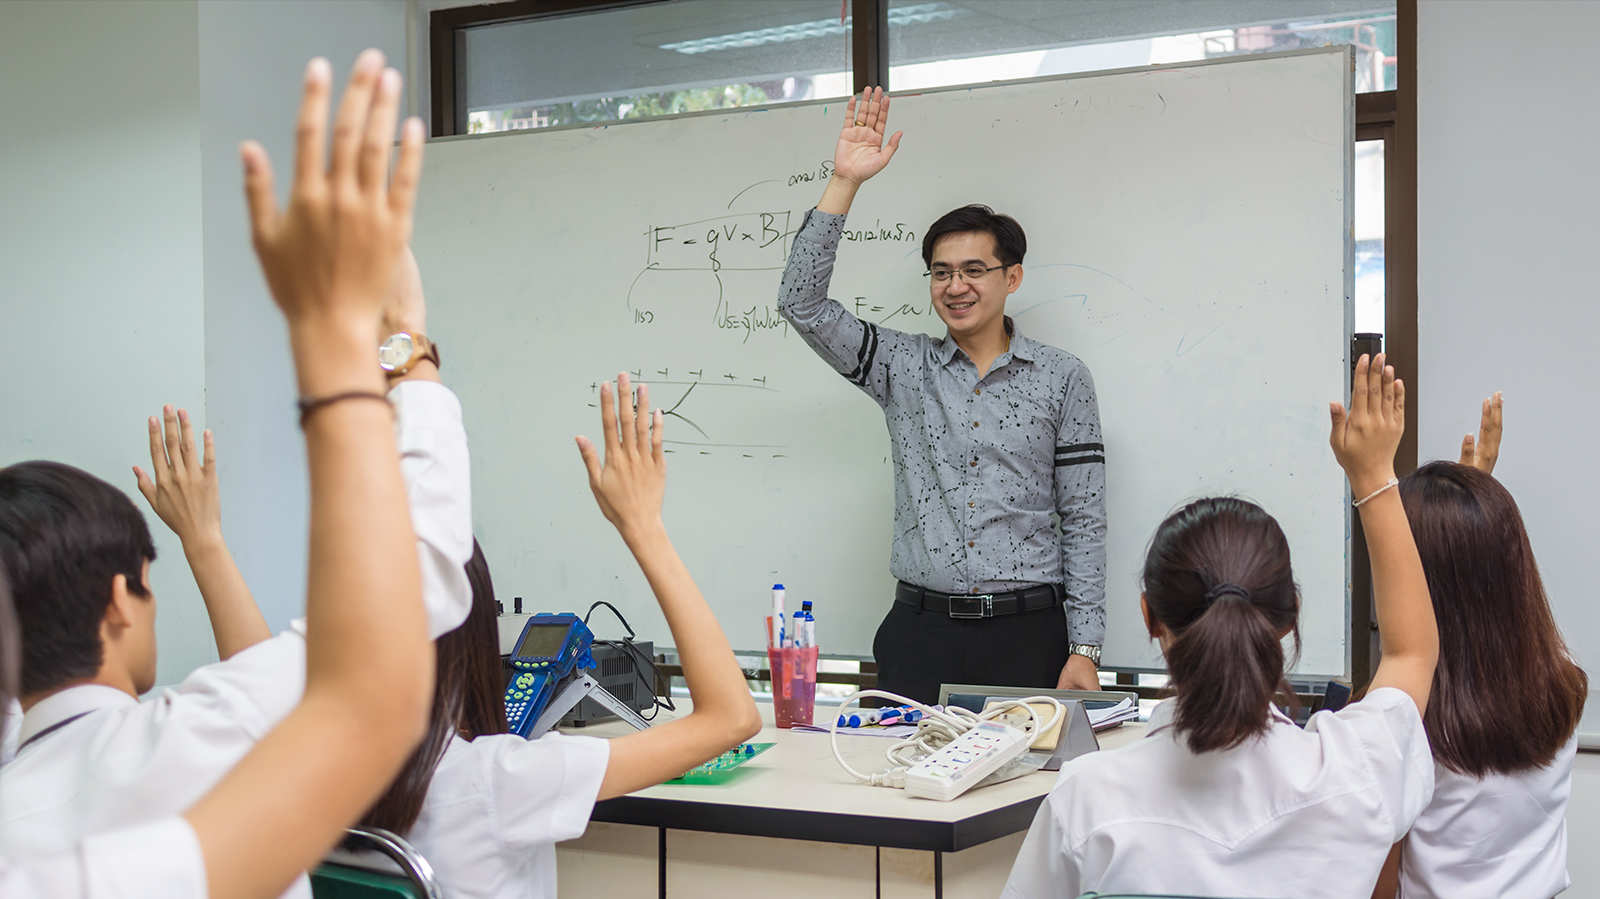 Can we do more for Singapore’s teachers besides free parking?